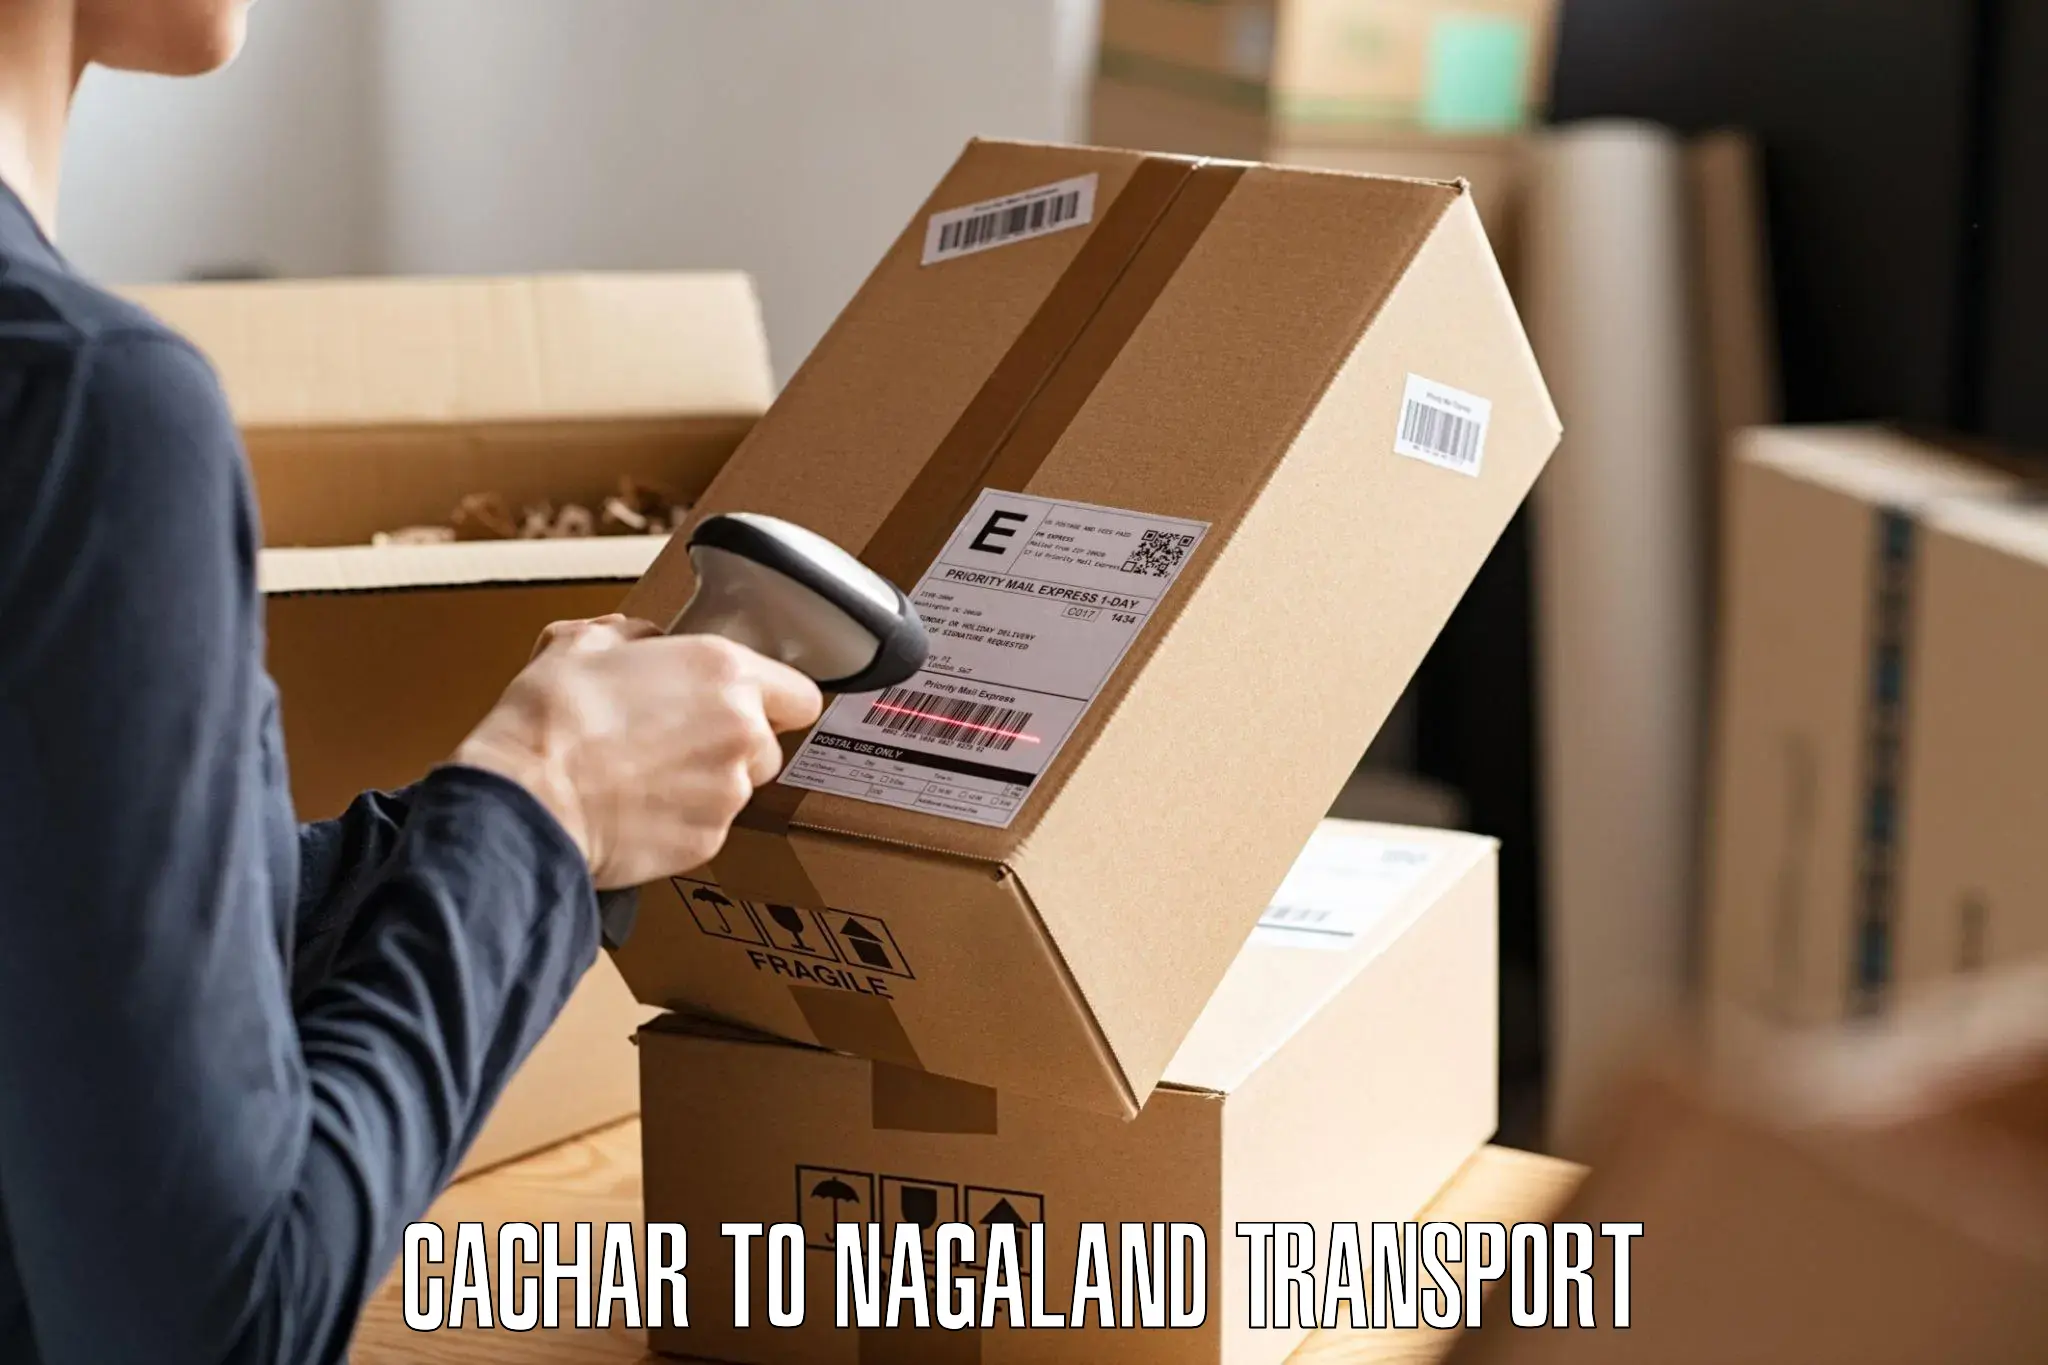 Nationwide transport services Cachar to Peren